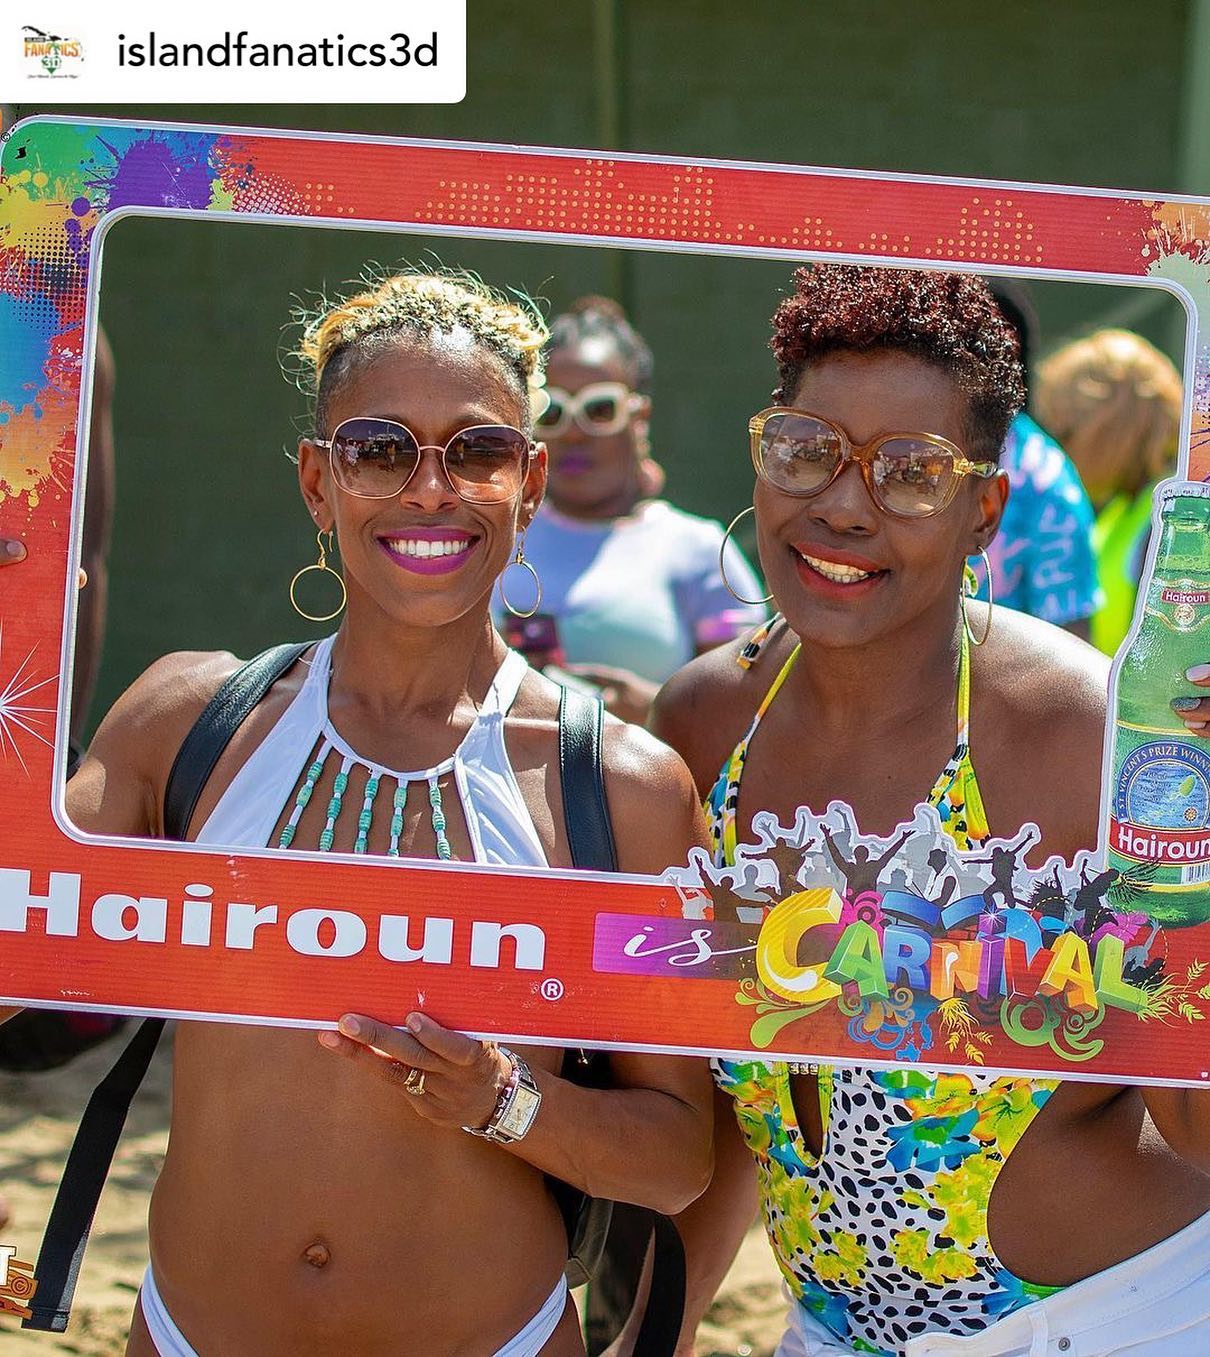 "HOLD YOUR OWN"HAIROUN BEER ON BOARD BOOZY BOAT & ALL VINCY MAS 2023🇻🇨.

*DRINK RESPONSIBILY* 

️EXTREMELY LIMITED LATE BIRD TICKETS REMAIN

GET YOUR TICKETS NOW OR BE LEFT OUT️ 


START YOUR CARNIVAL WEEKEND ON BOOZY BOAT ️ 

- The All-inclusive Vincy Mas Party Cruise  

🛟BOOZY BOAT 2️⃣0️⃣2️⃣3️⃣ - "Welcome to Candy Land"🪅🏝️🌎🇻🇨🇻🇨🇻🇨🇻🇨

DATE: Friday July 7th, 2023

Boarding: 9am @ Villa, St. Vincent🇻🇨

ATTIRE : All White Swimwear With A Burst of Color 😎

DRINKS & FOOD INCLUSIVE 

️LIMITED TICKETS REMAIN
 

www.boozyboat2023.eventbrite.com 

"BOOZY BOAT - YOUR CARNIVAL WEEKEND STARTS HERE" ️

@islandfanatics3d 
_______________________